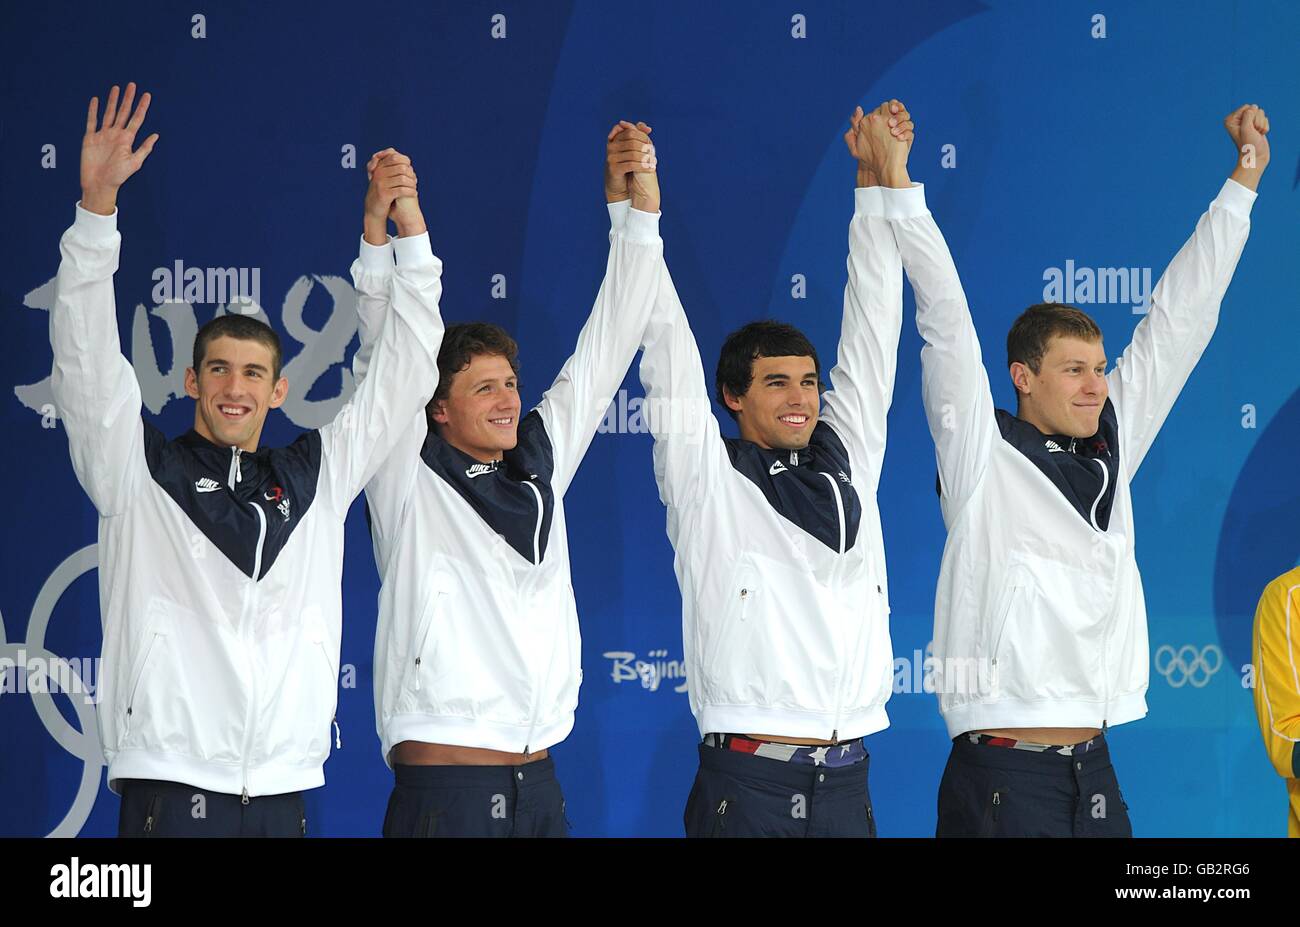 USA's (l-r) Michael Phelps, Ryan Lochte, Ricky Berens and Peter Vanderkaay await to receive their Gold medals for the Men's 4x200m freestyle relay final at the National Aquatics Center on Day 5 of the 2008 Olympic Games in Beijing. Stock Photo